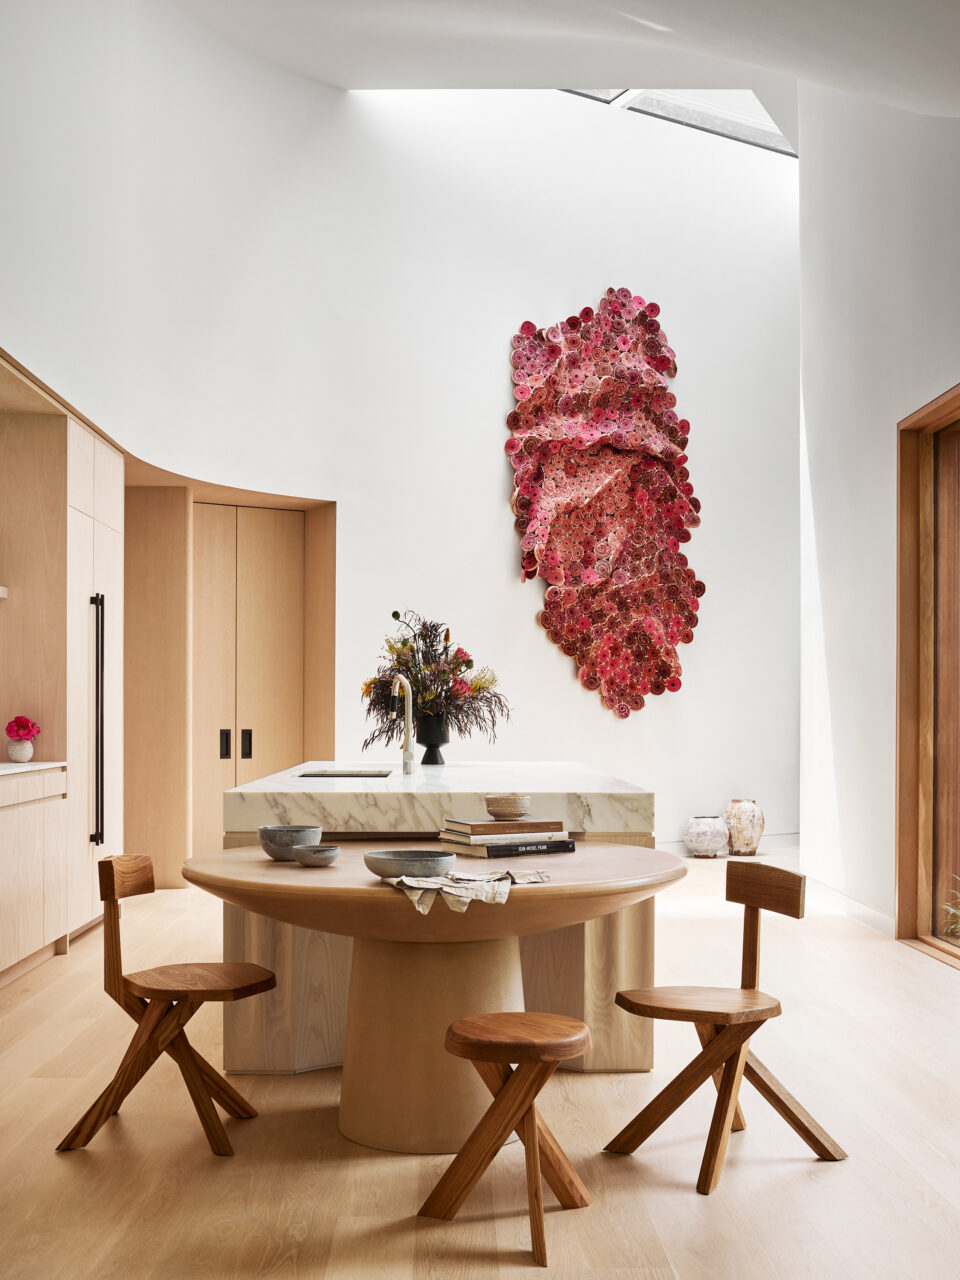 A bright wall sculpture overlooks a wooden dining table and kitchen